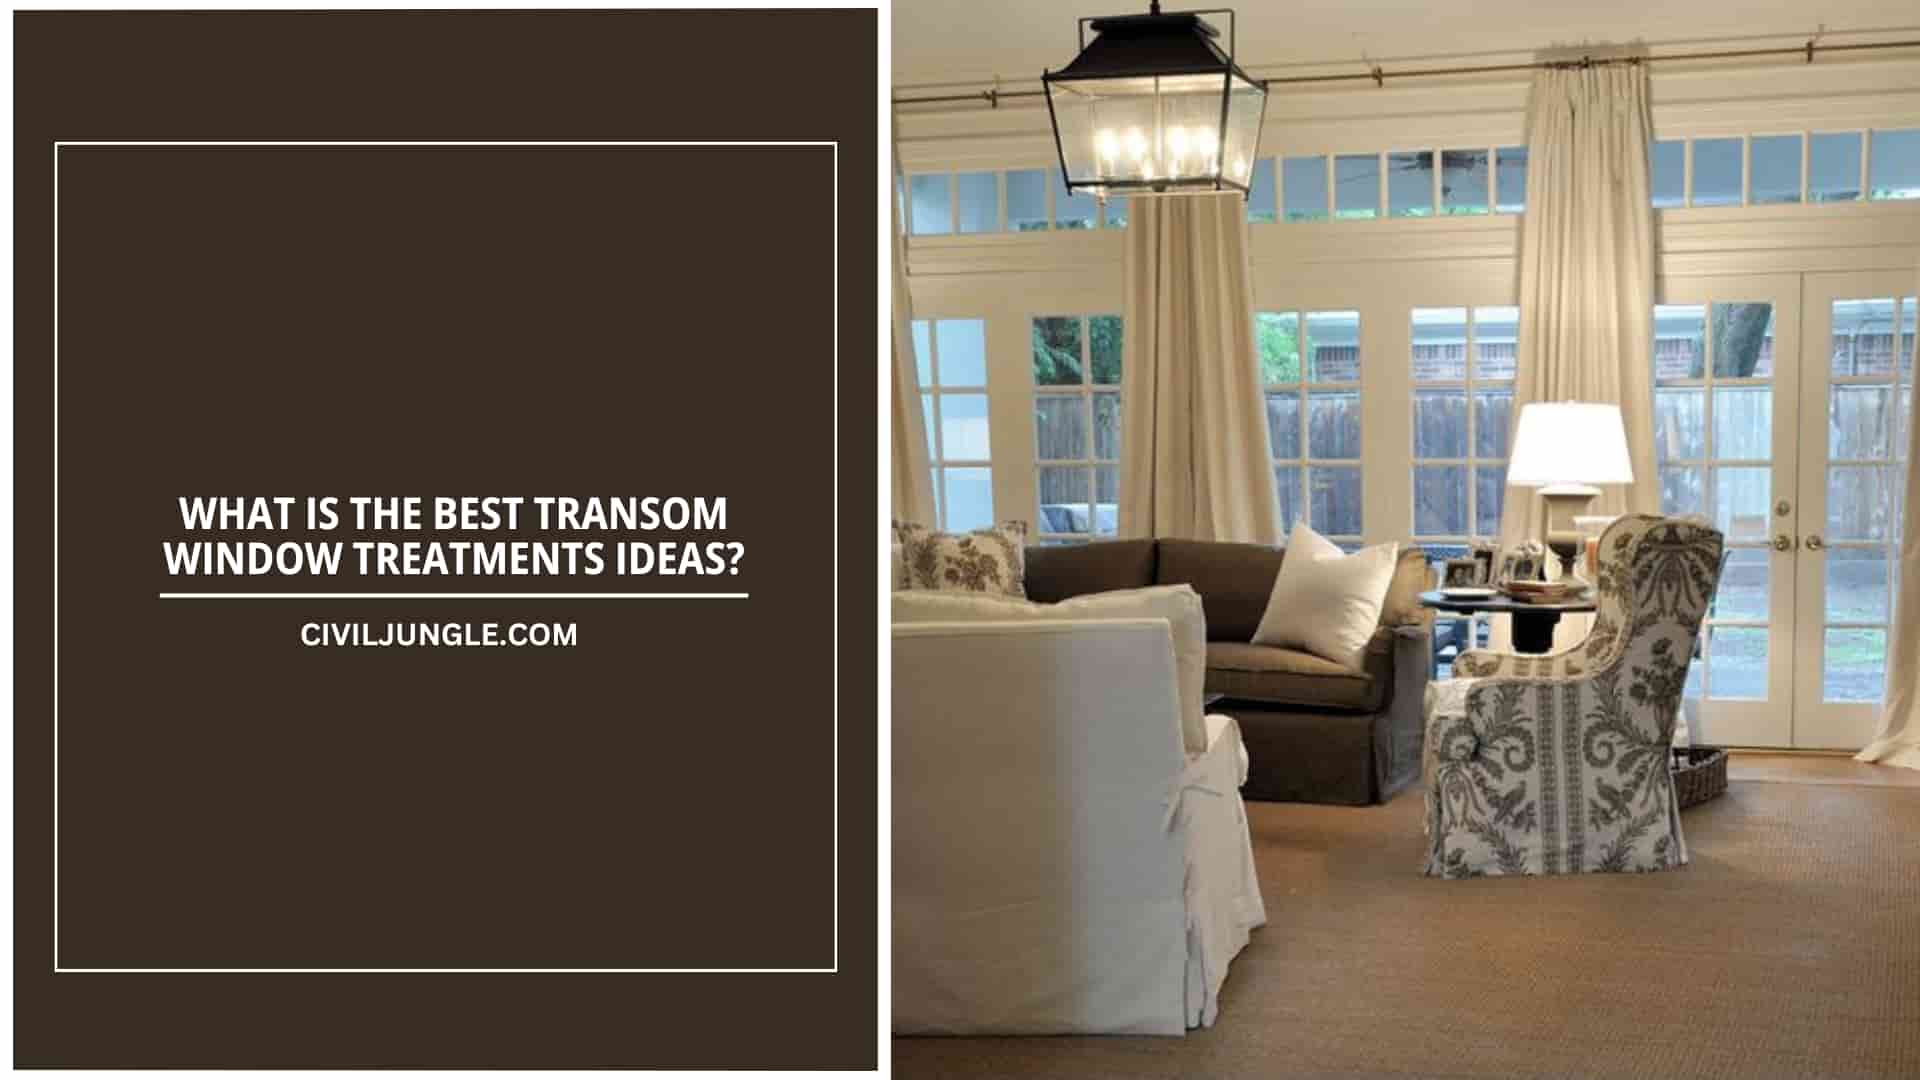 What Is the Best Transom Window Treatments Ideas?